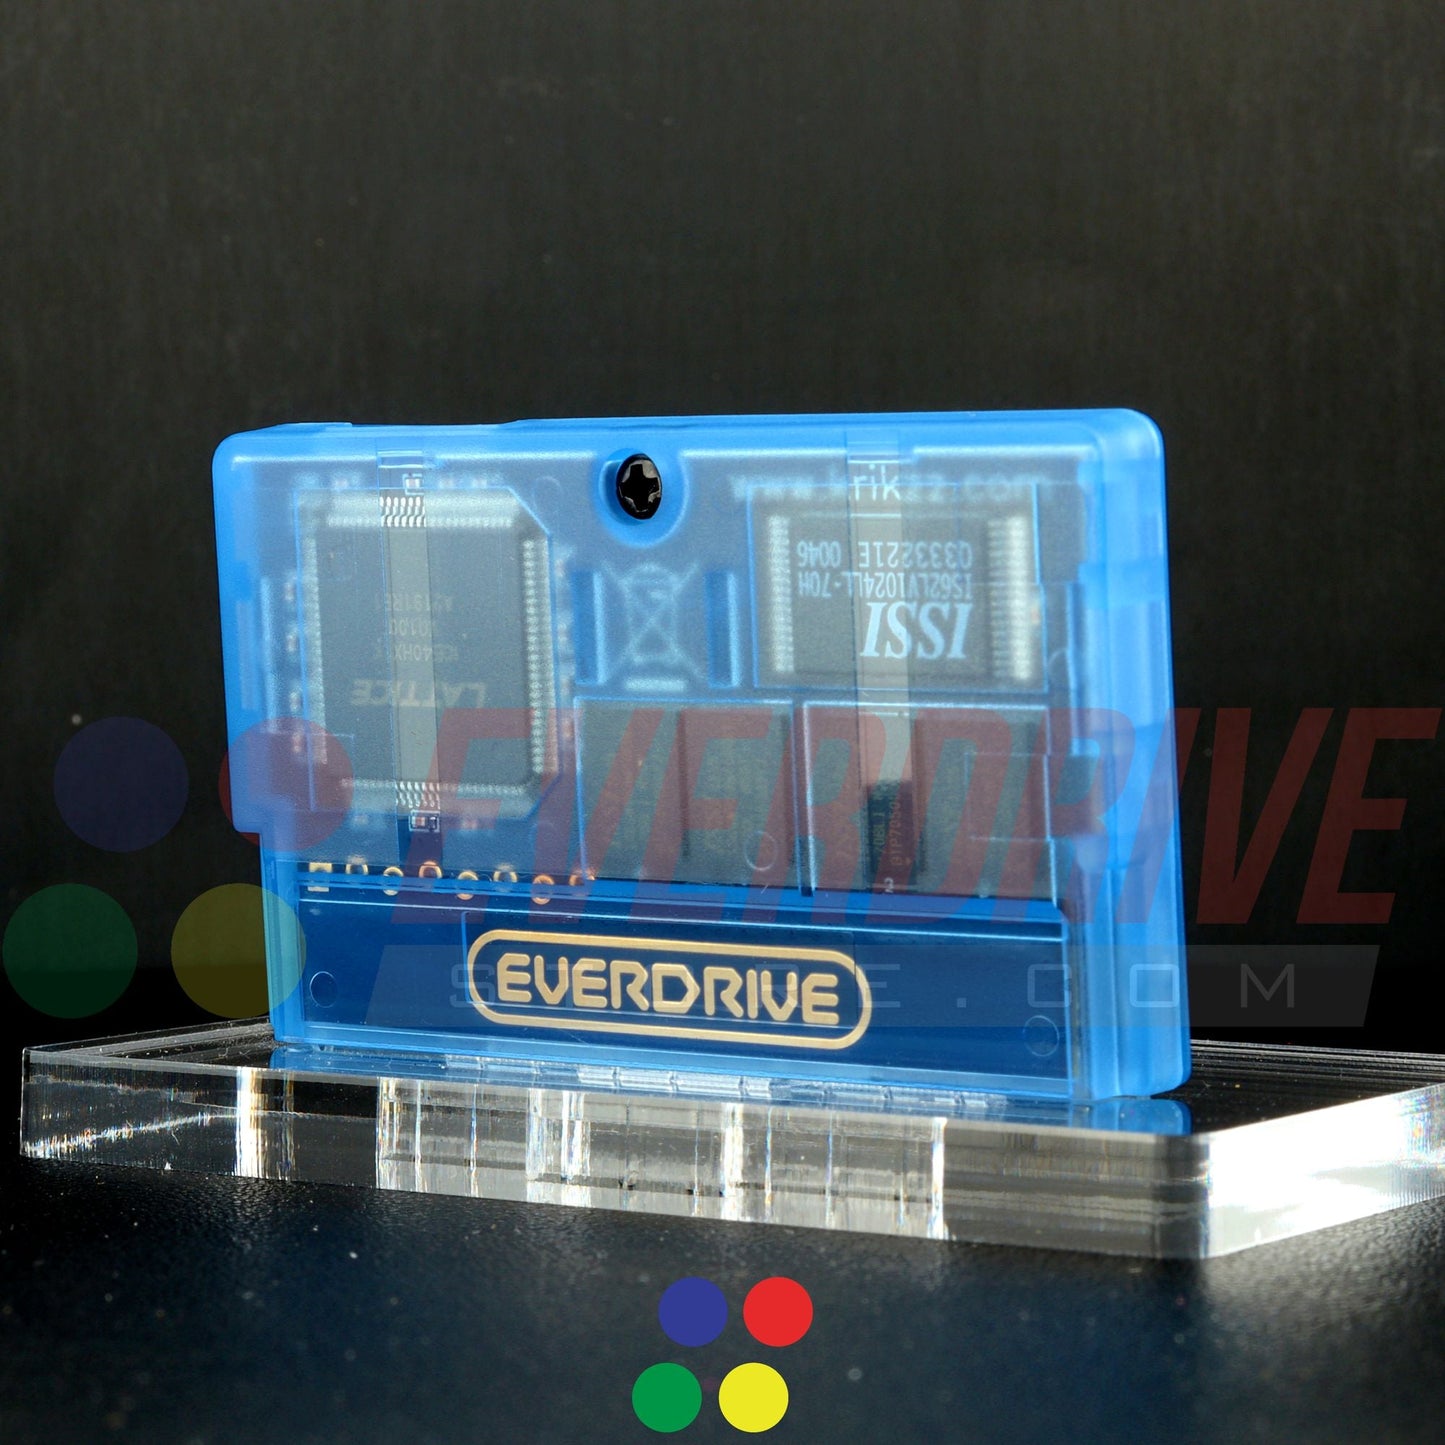 Everdrive GBA Mini - Frosted Blue